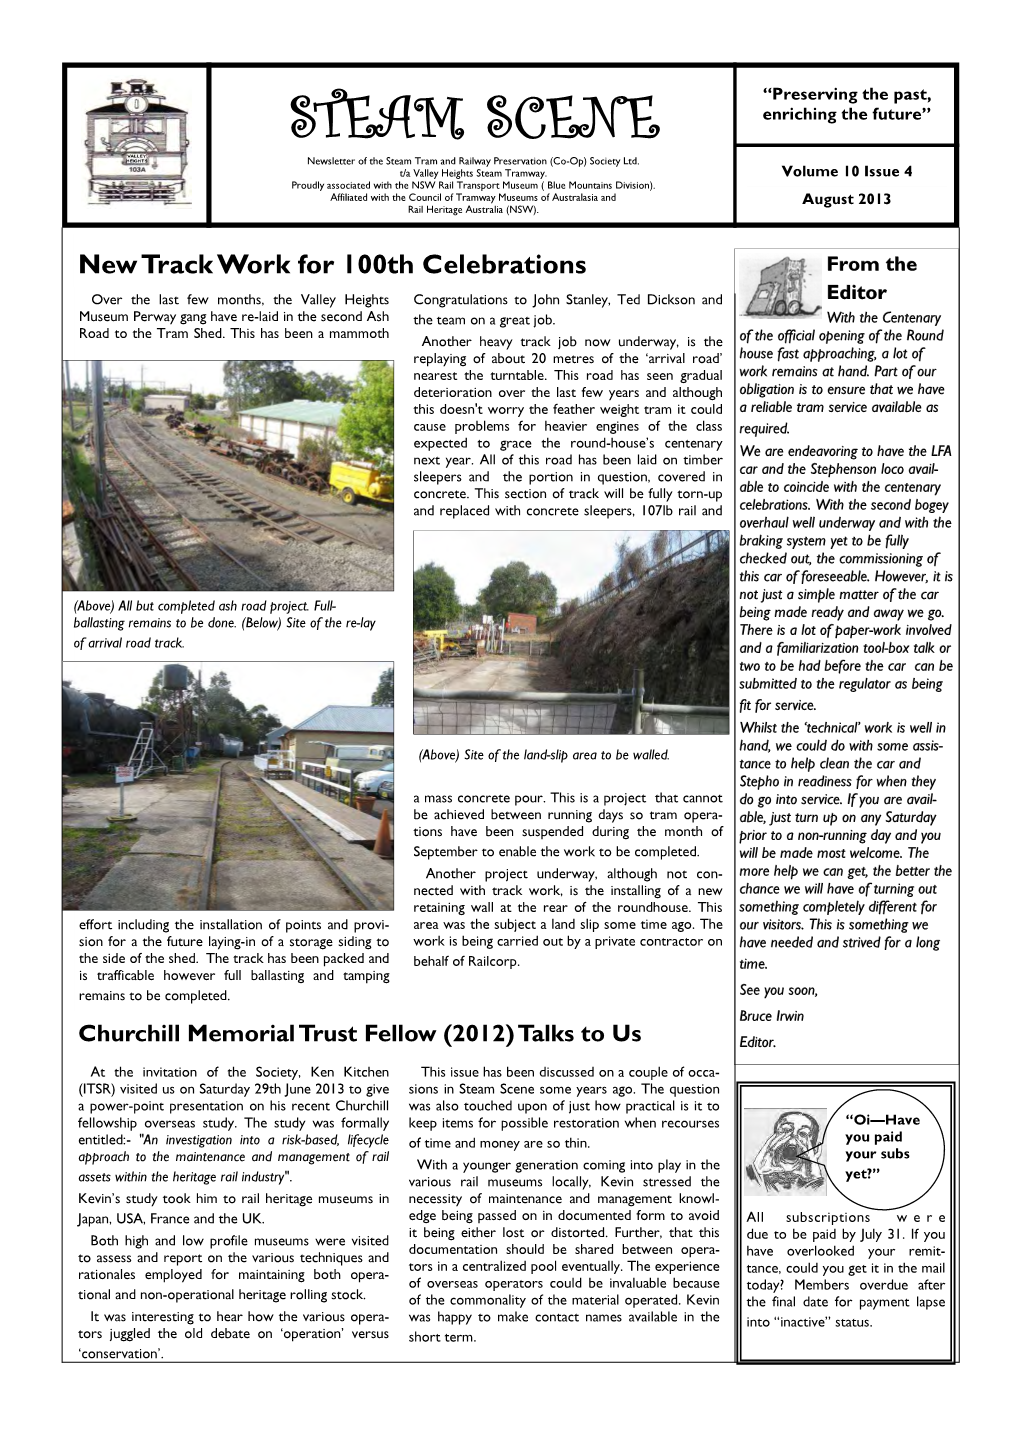 Volume 10 Issue 4 Proudly Associated with the NSW Rail Transport Museum ( Blue Mountains Division)